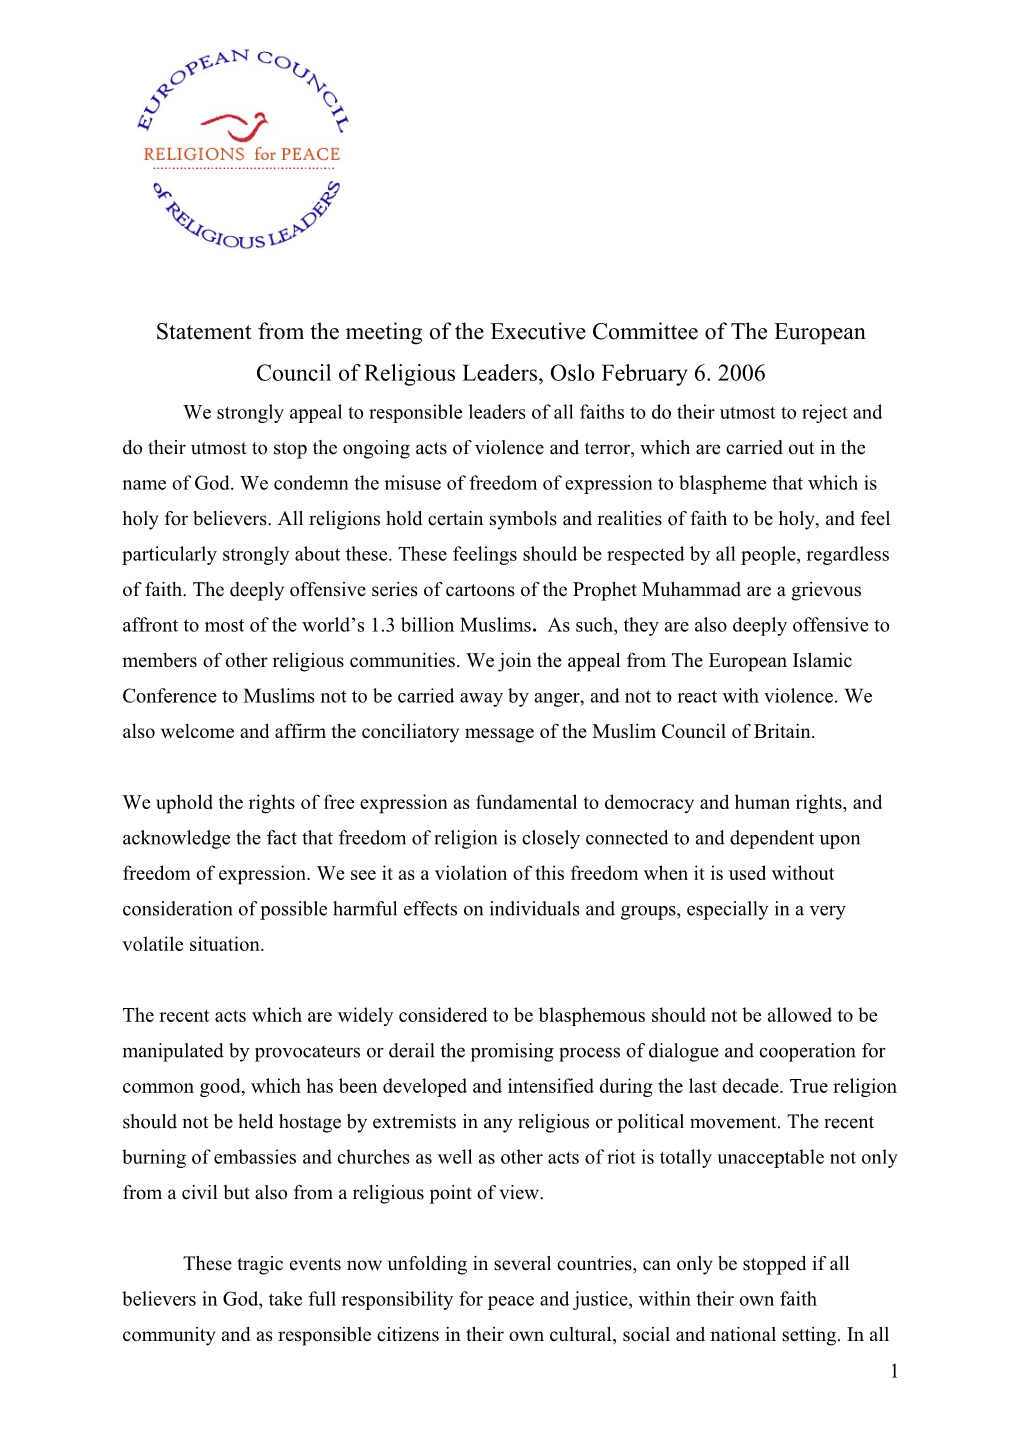 Statement from the Meeting of the Executive Committee of the European